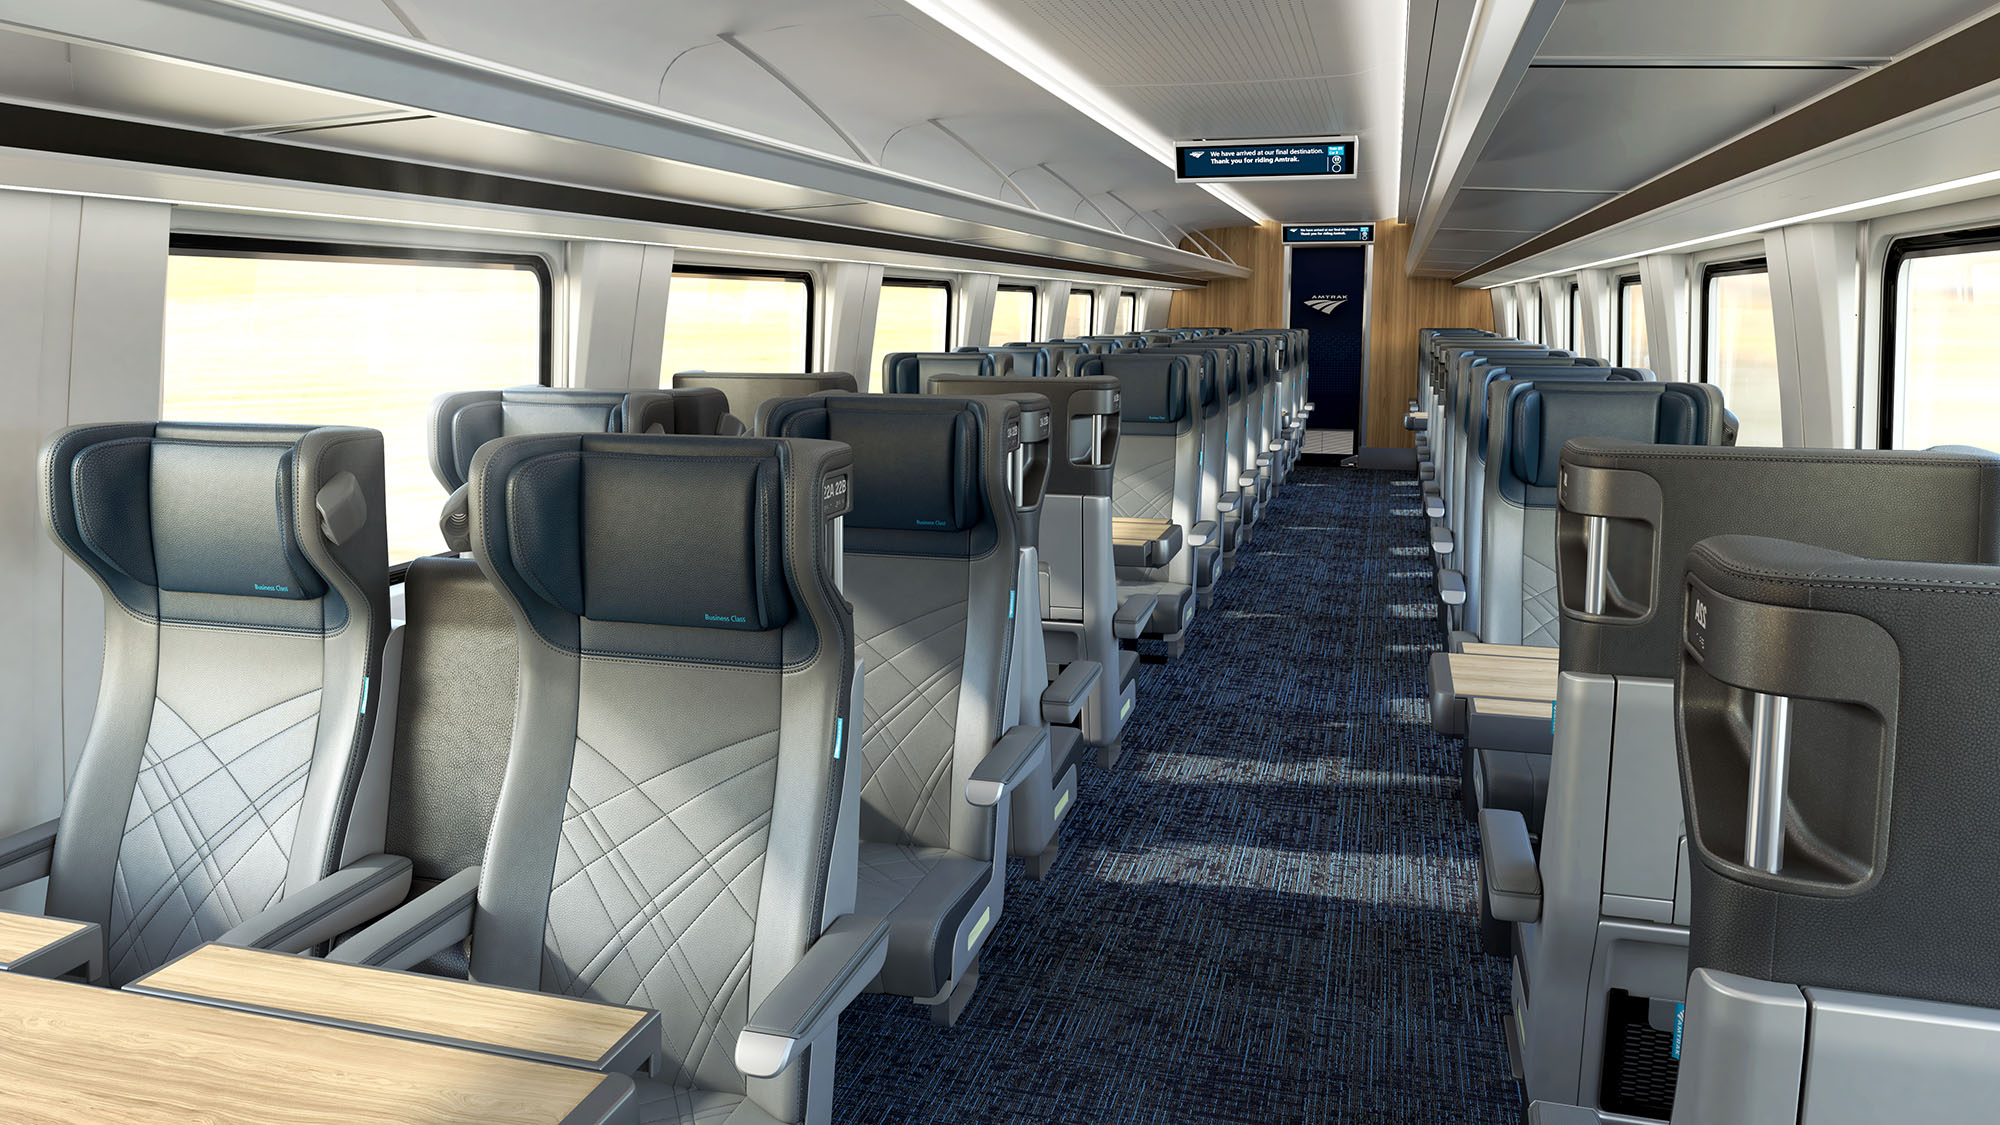 Introducing Our New Trains: Amtrak Airo | Amtrak